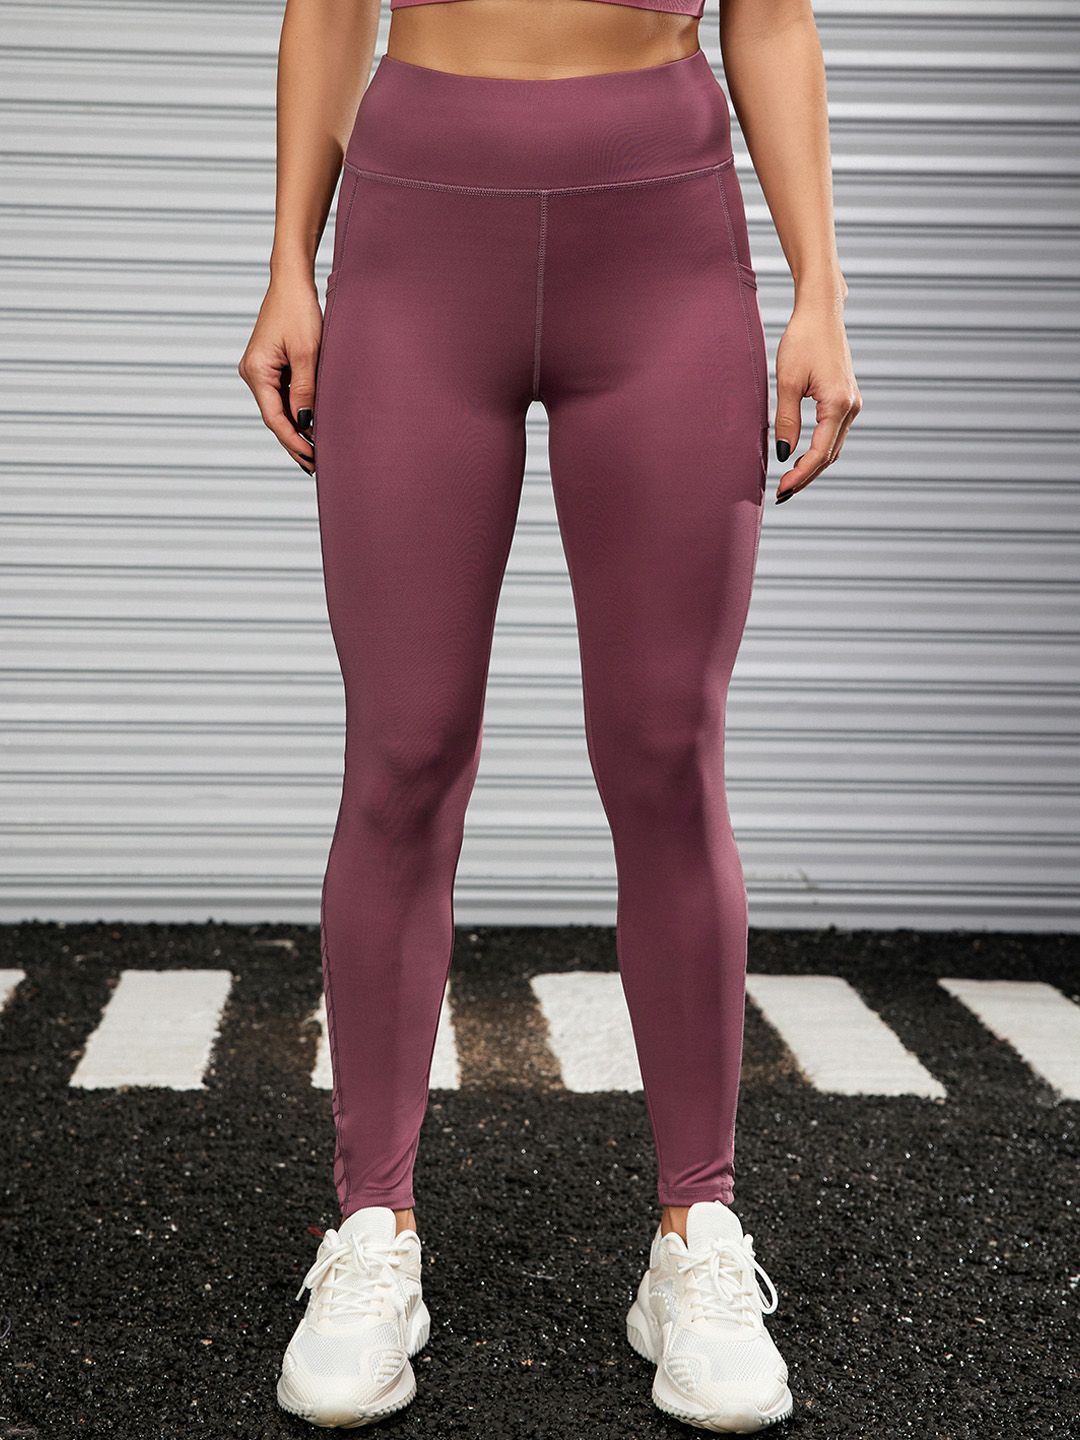 URBANIC Women Pink Solid High-Rise Training & Gym Tights Price in India